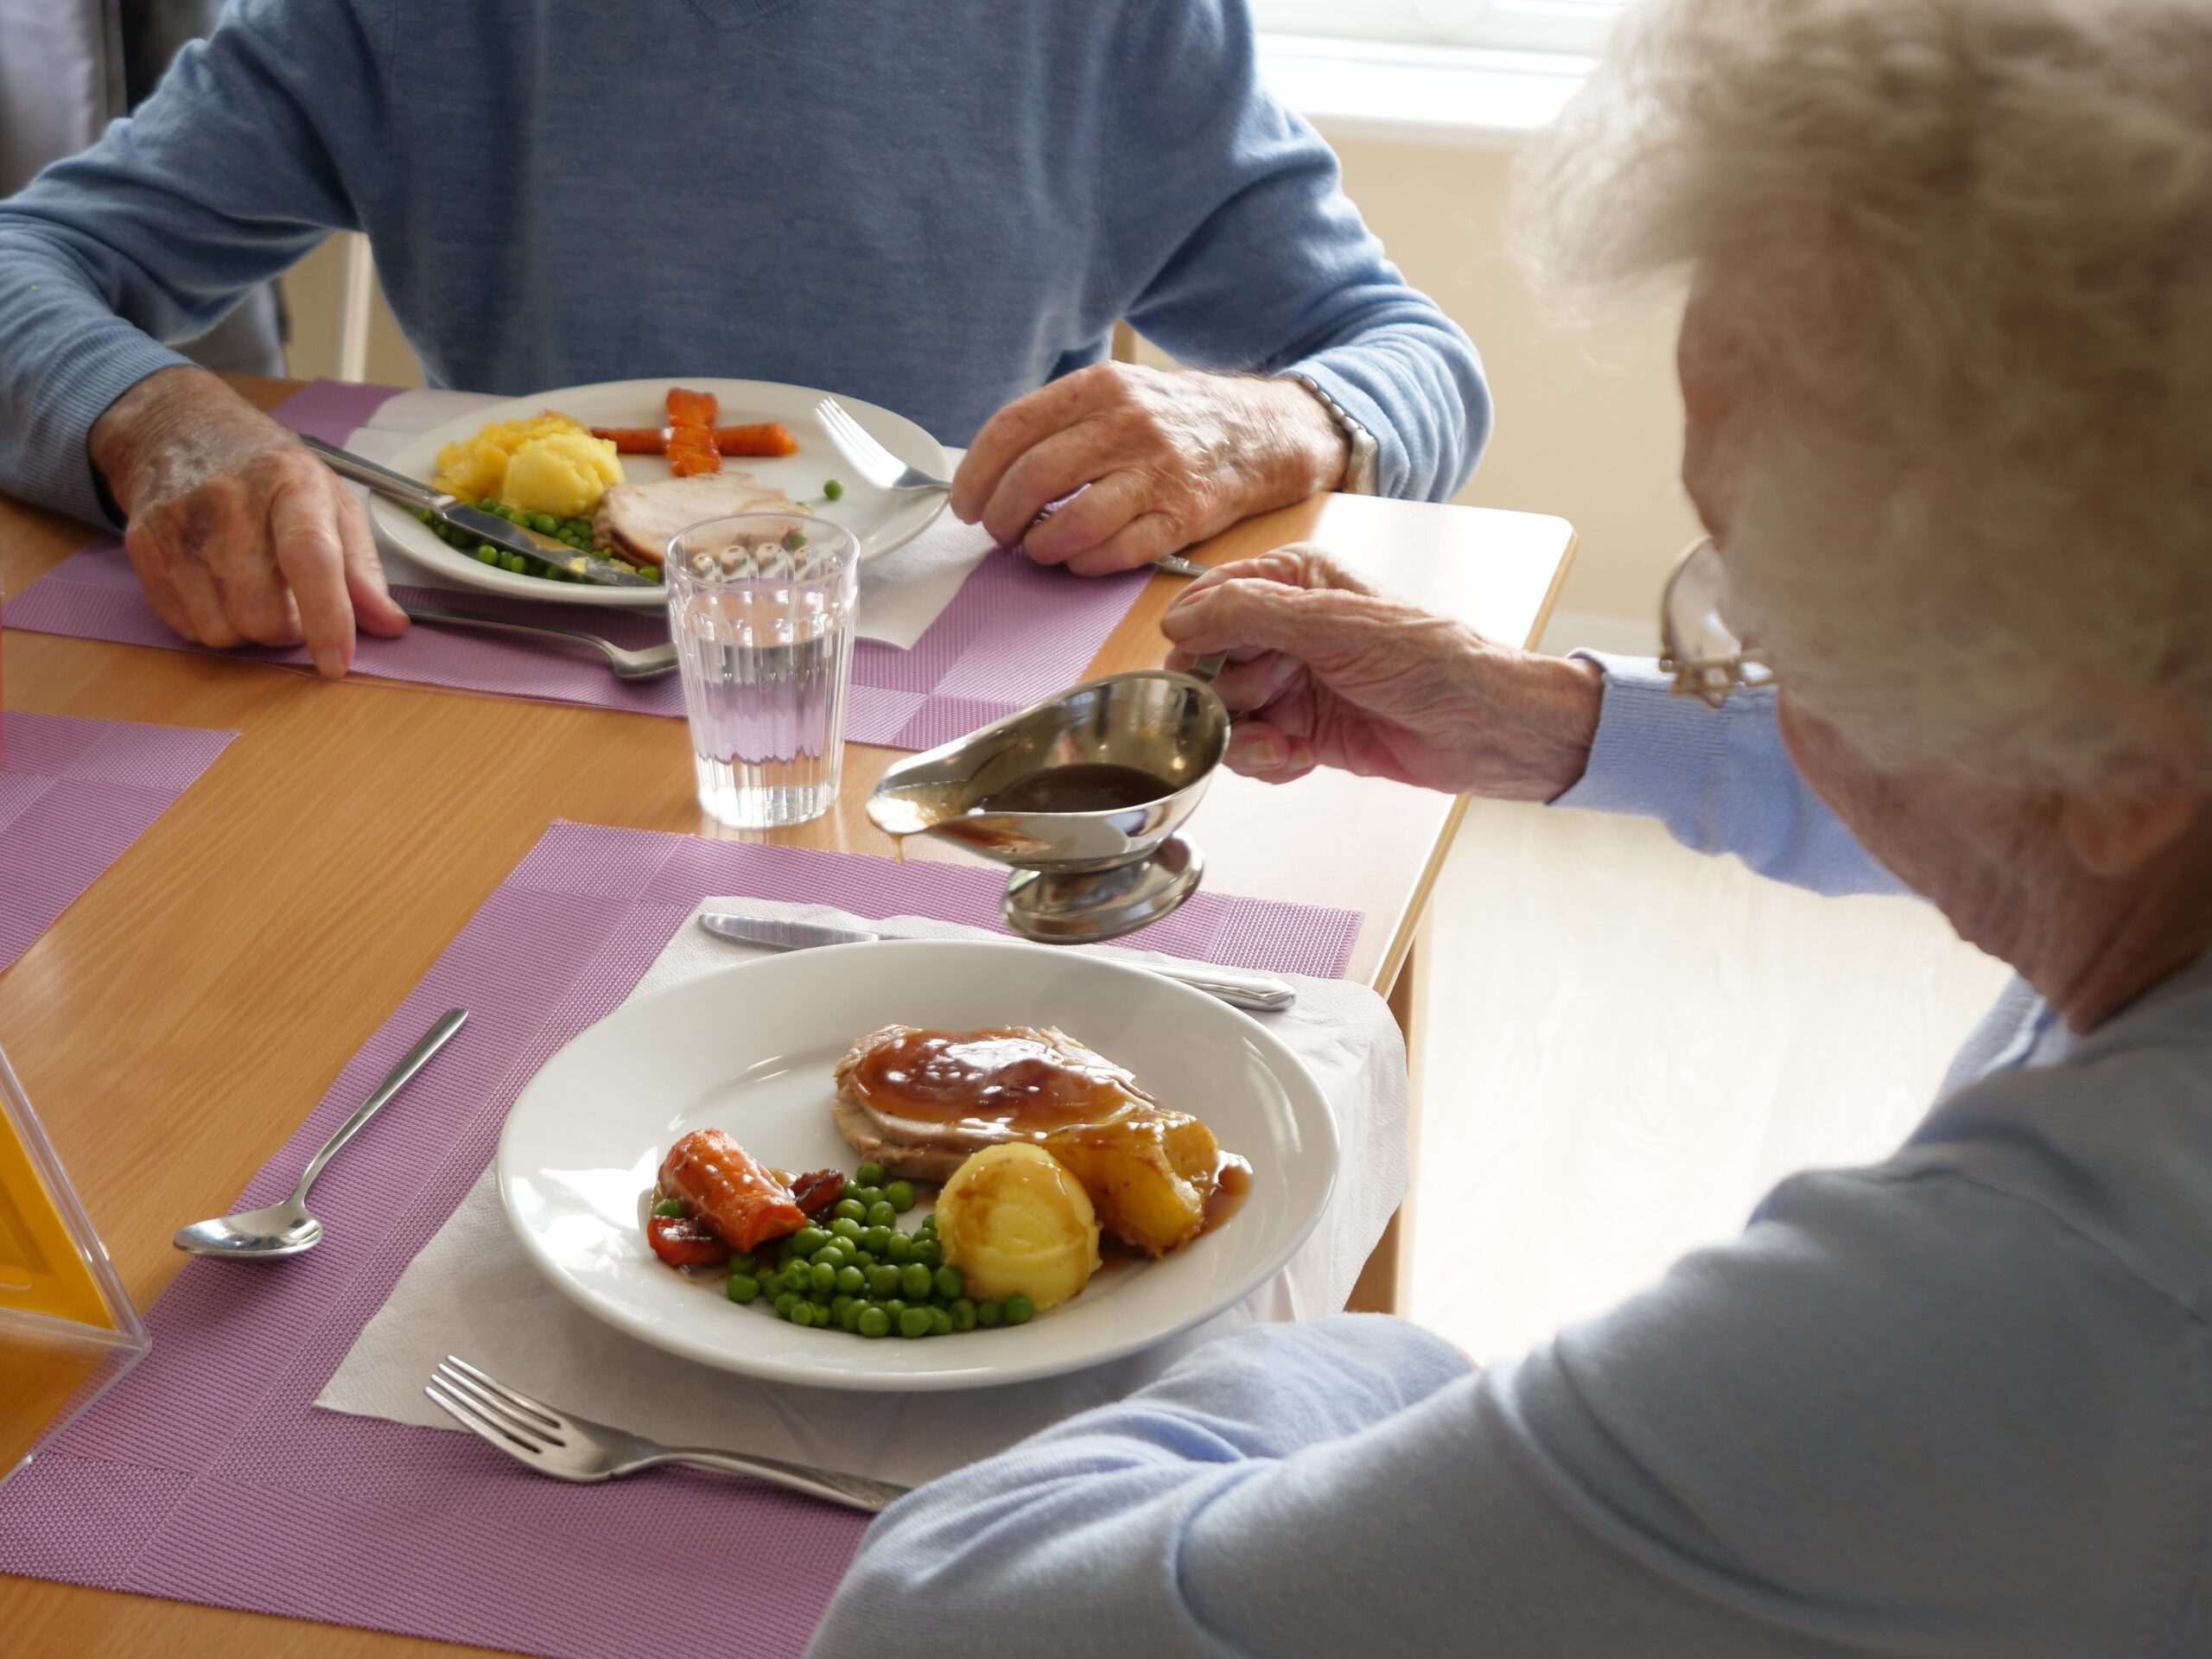 Appetizing Meals at Roselands Residential Care Home